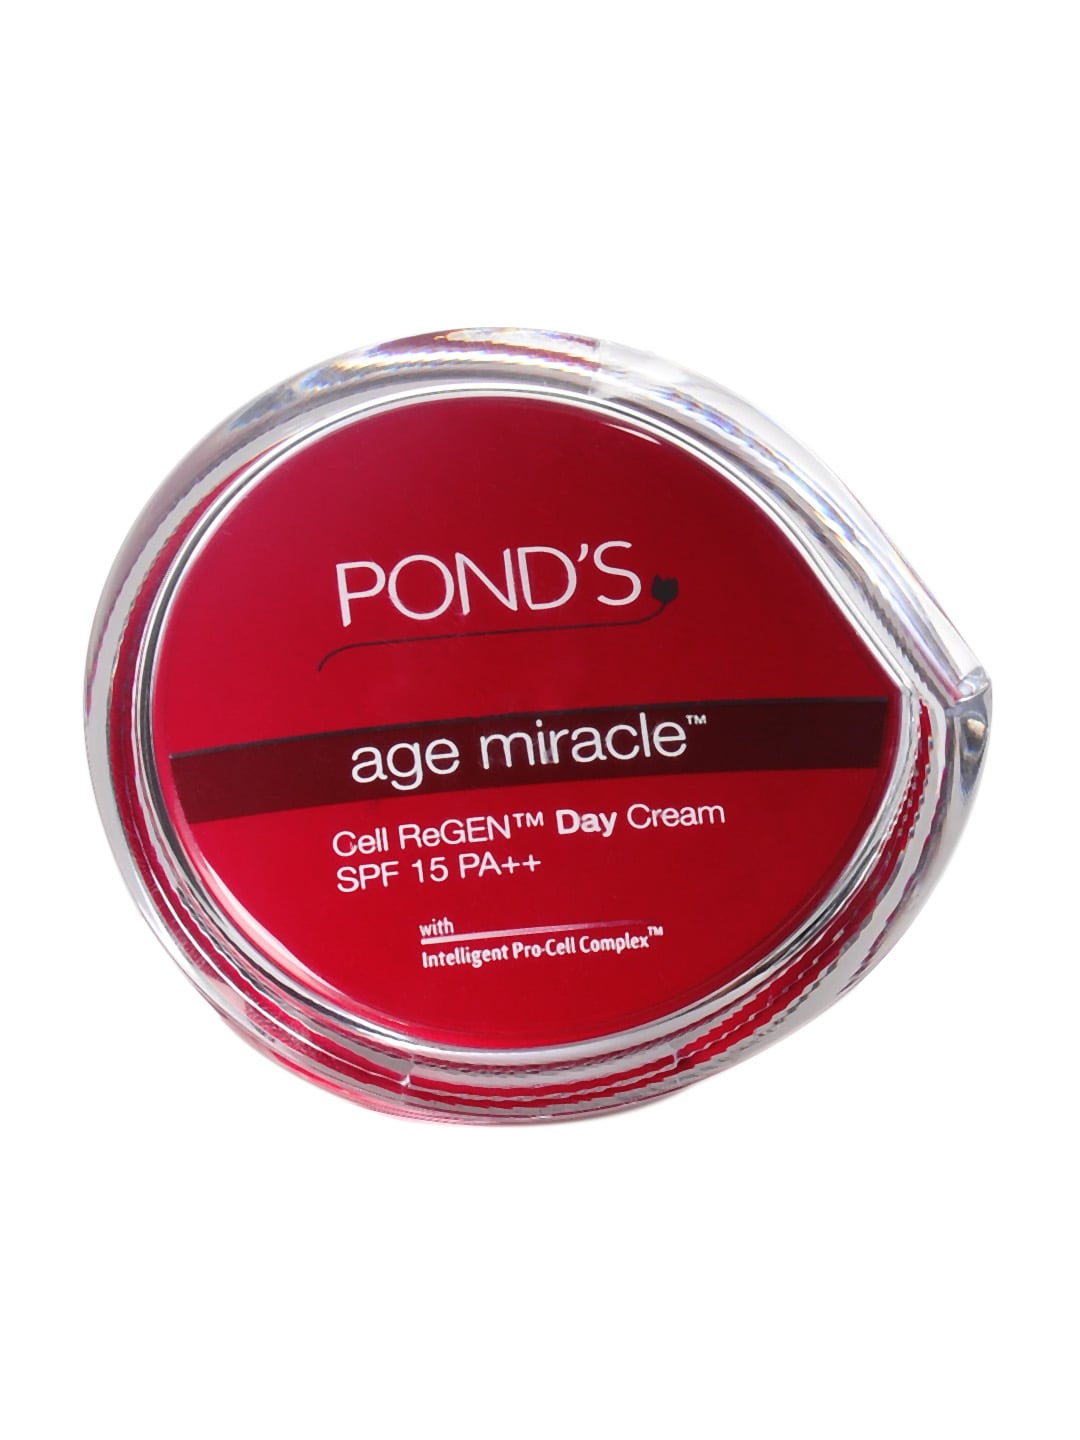 Ponds Age Miracle Day Cream SPF 15